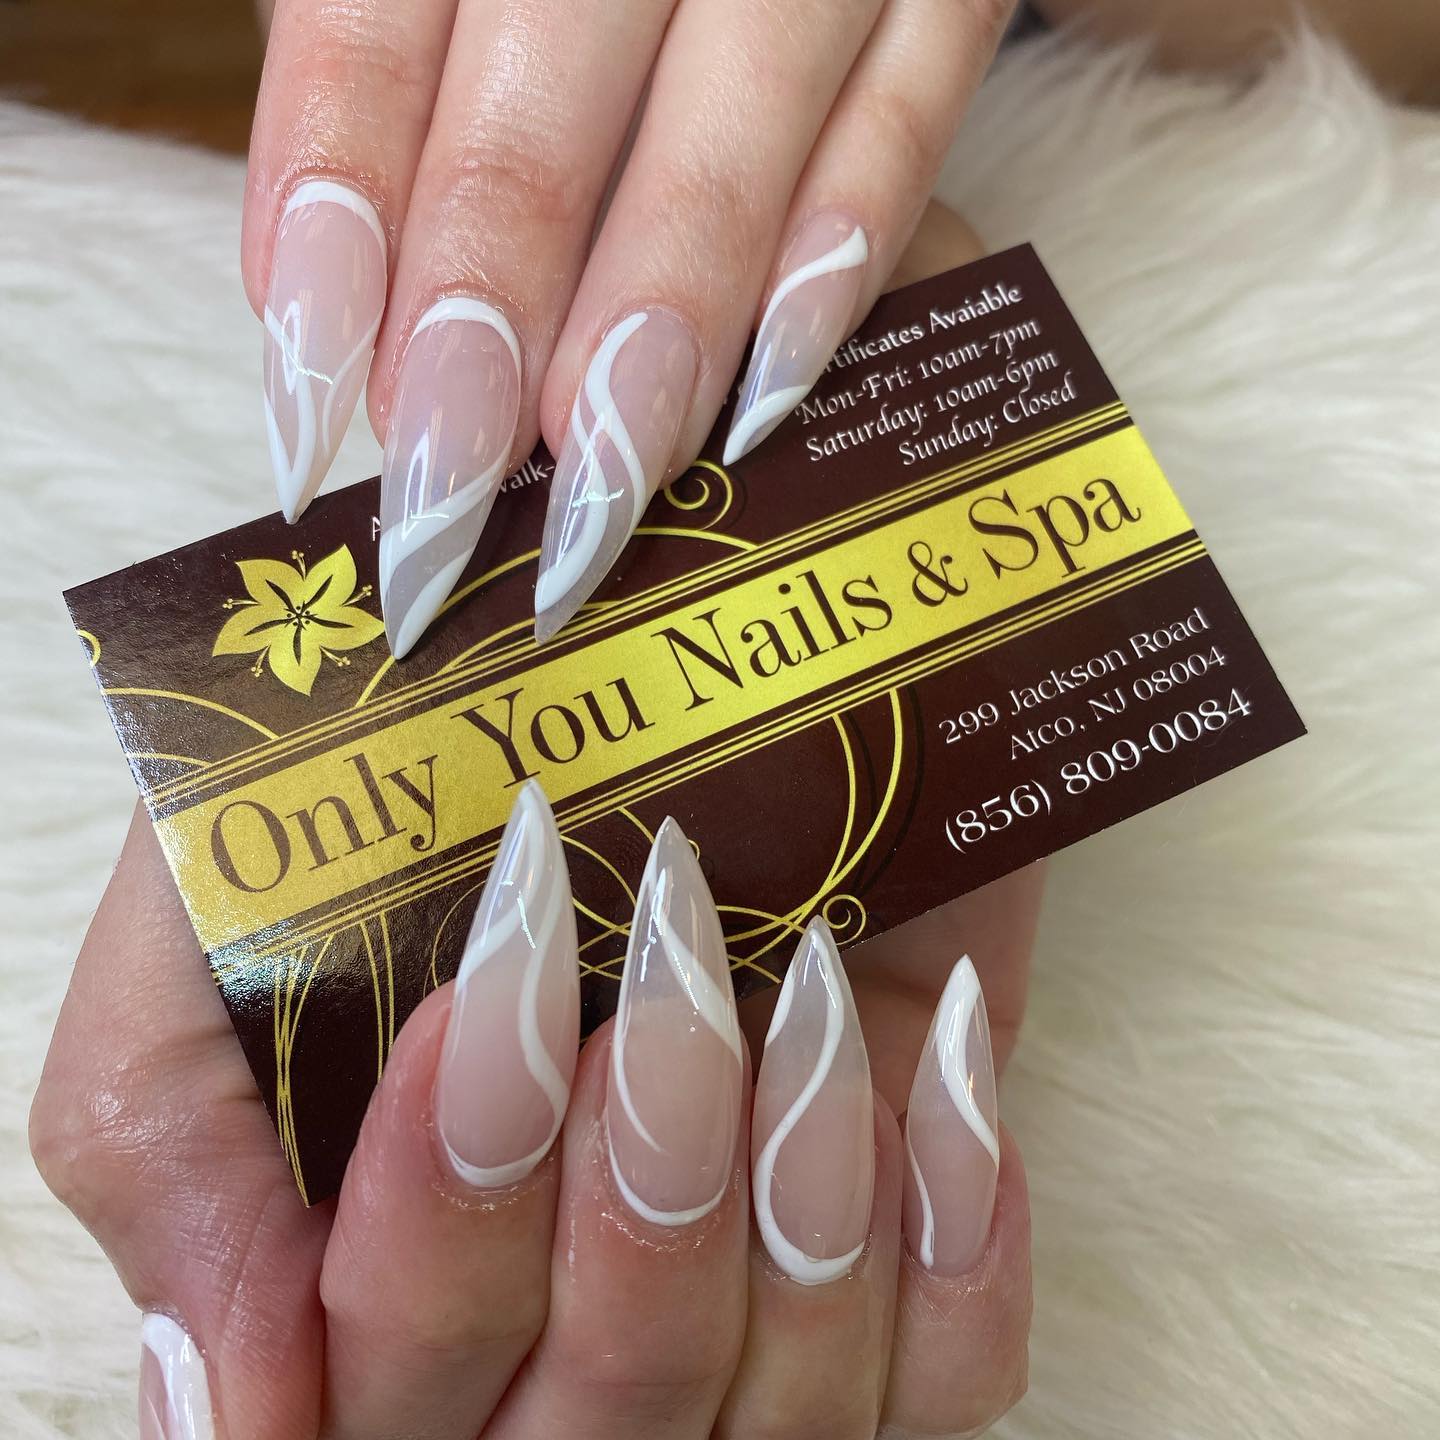 Only You Nail and Spa 421 NJ-73, Berlin New Jersey 08009